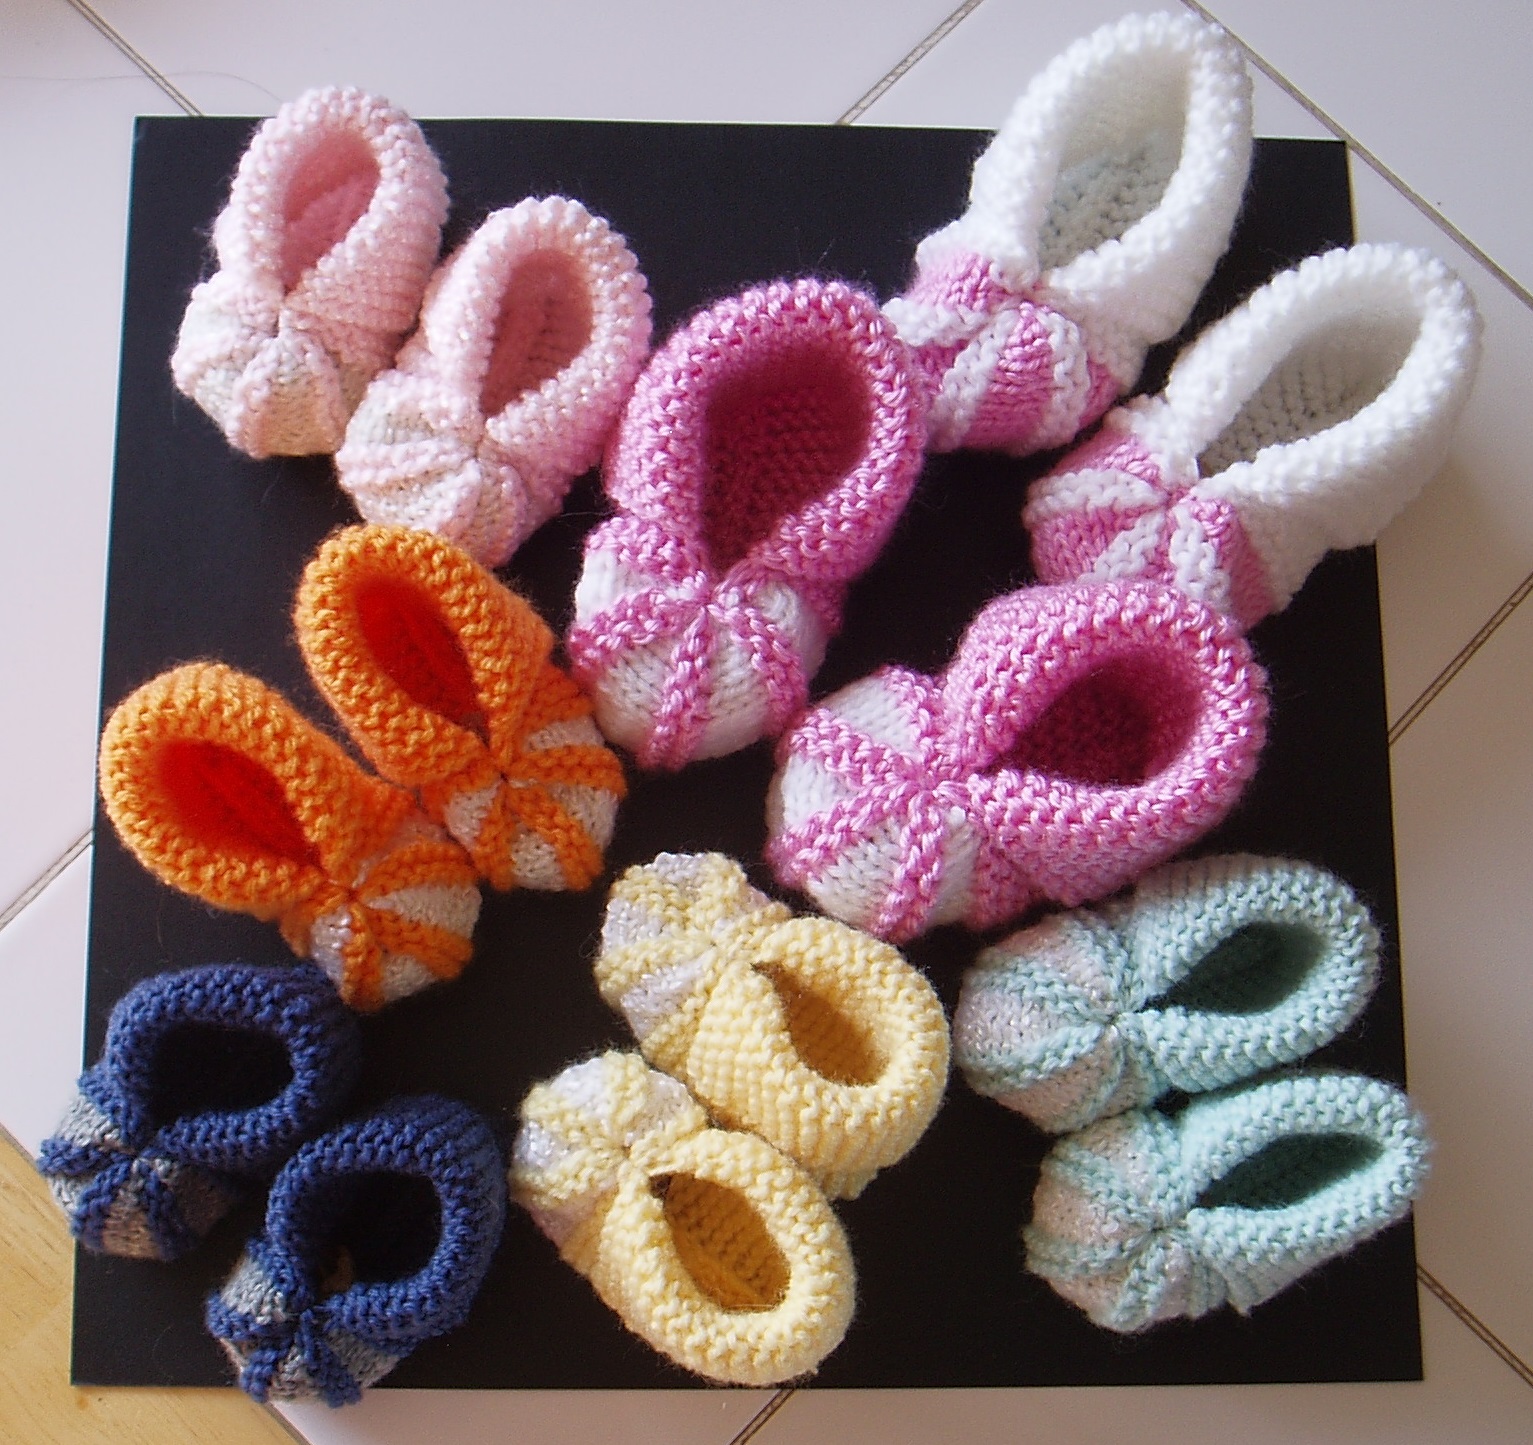 Hand knit baby booties